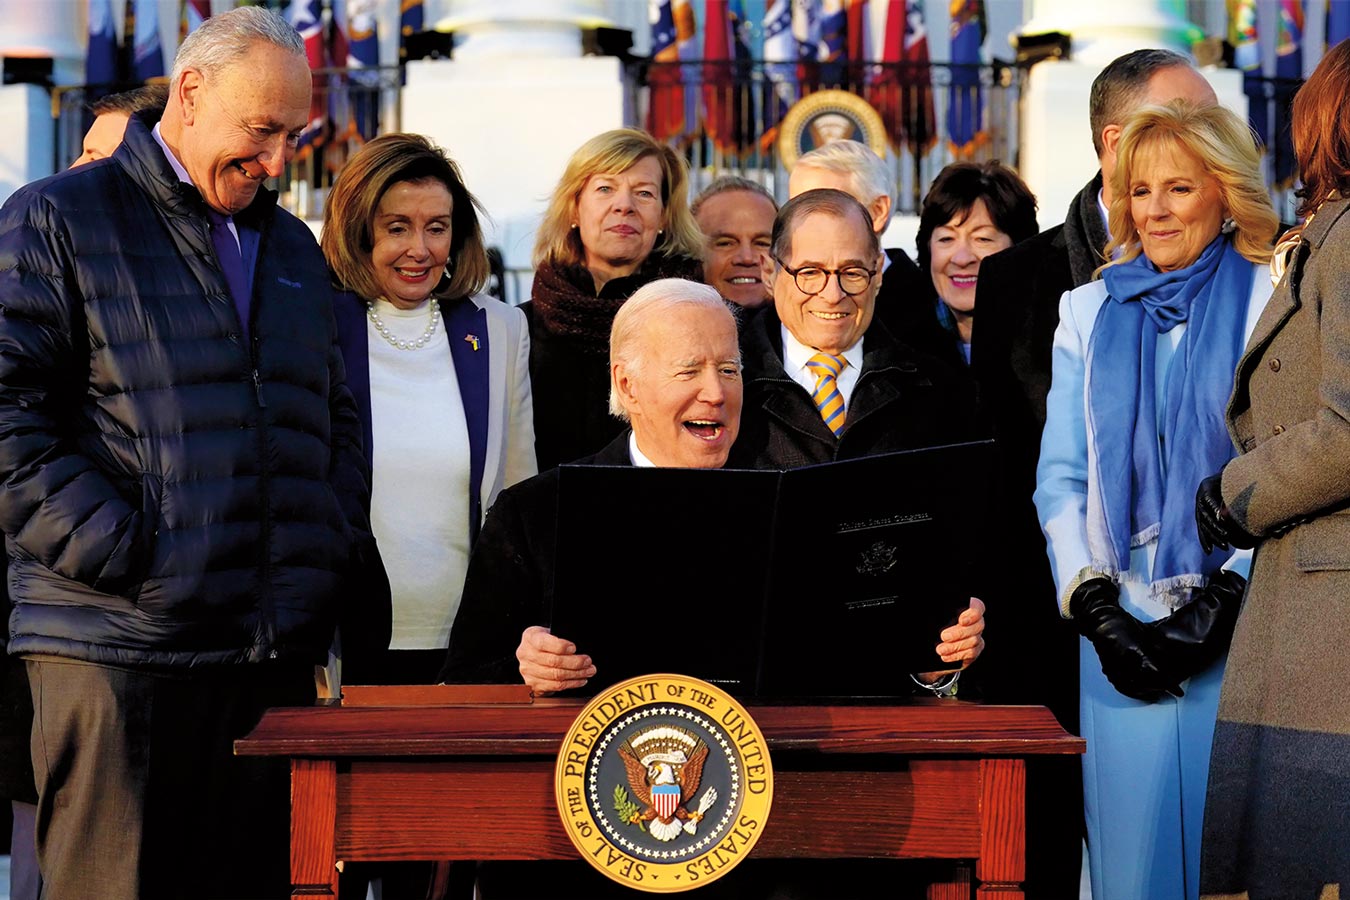 Rep. Nadler stands with a group of others behind President Biden as he holds a bill